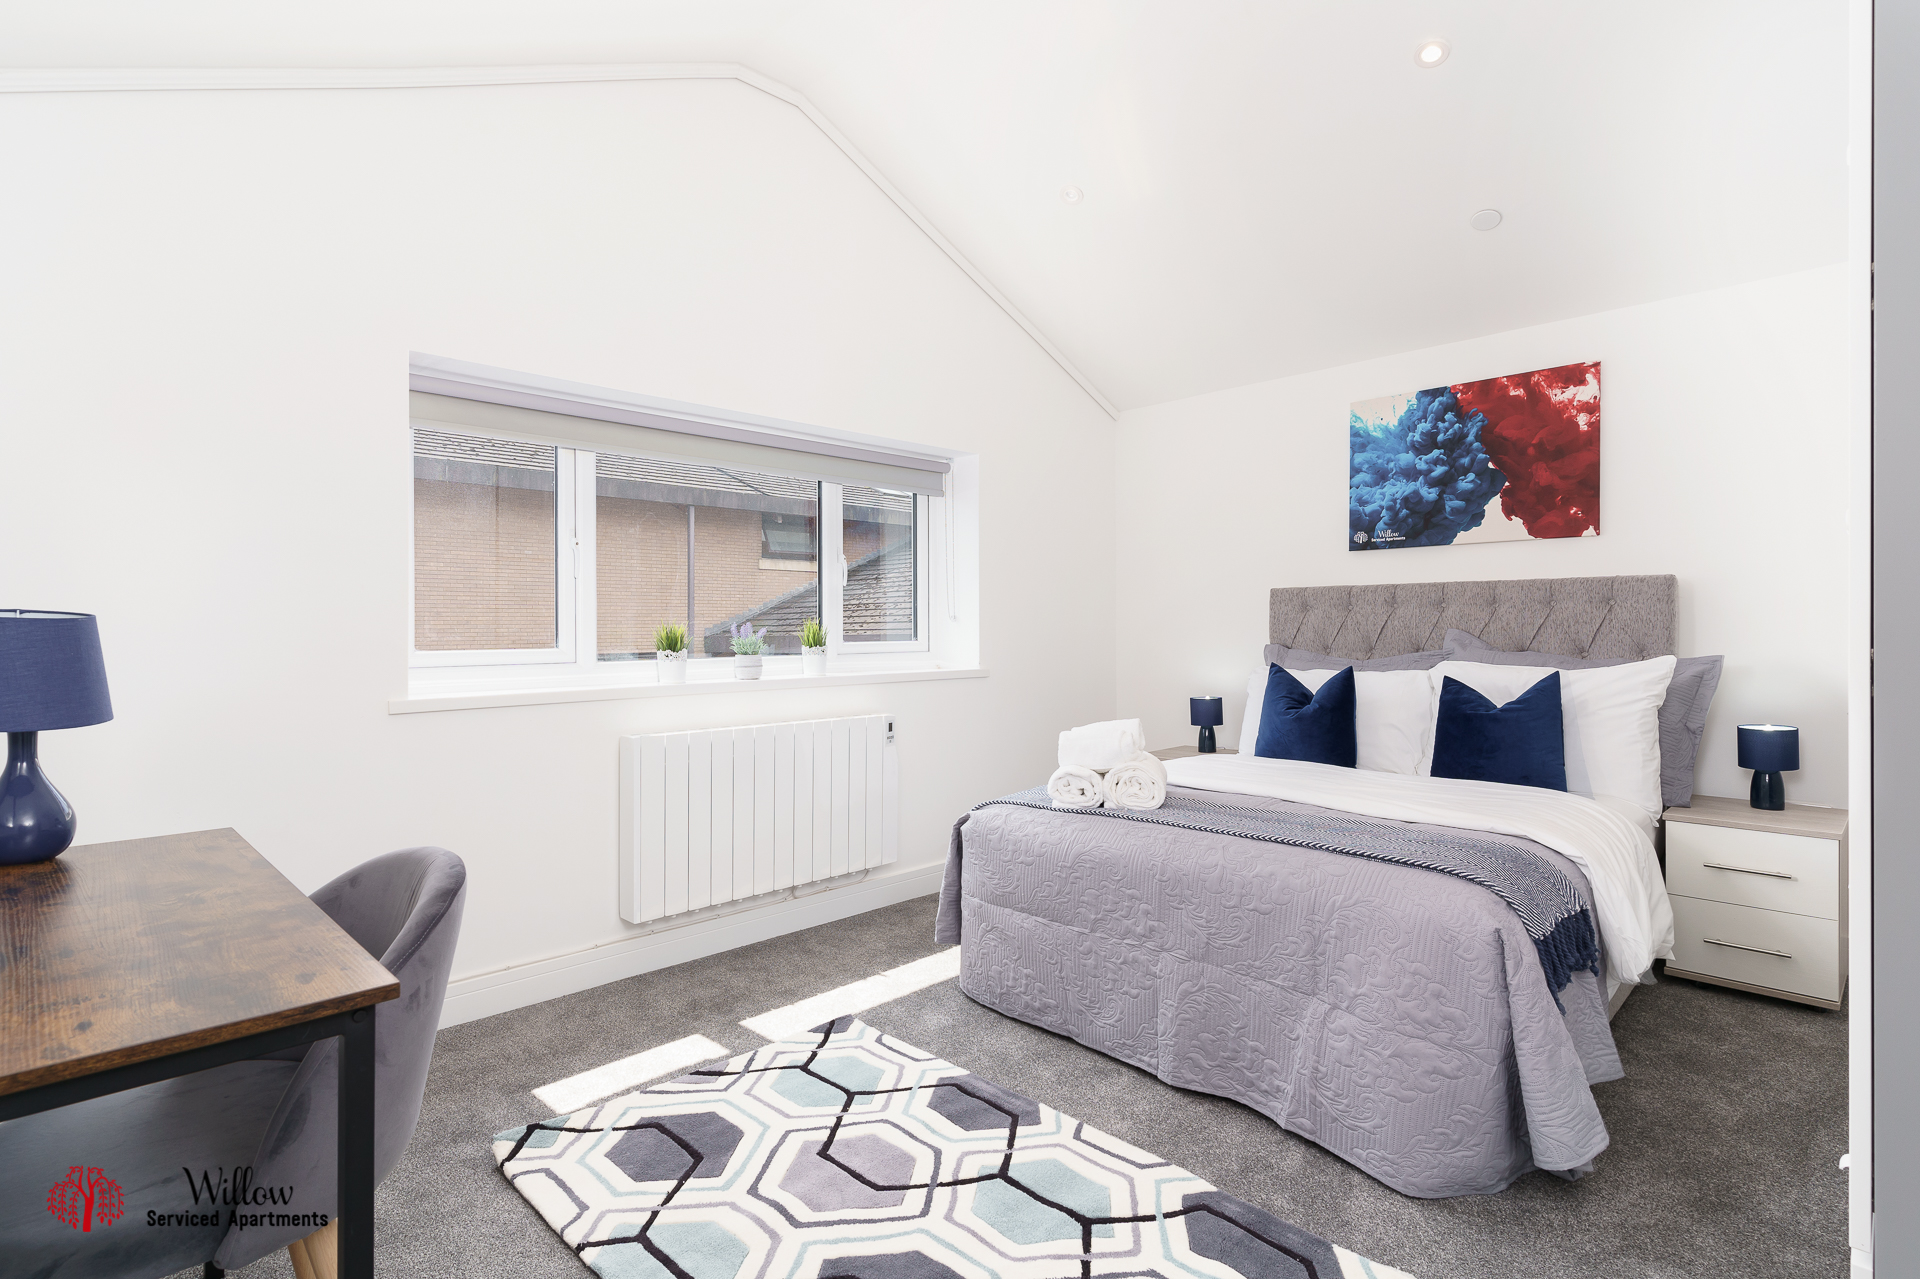 © South Wales Property Photography